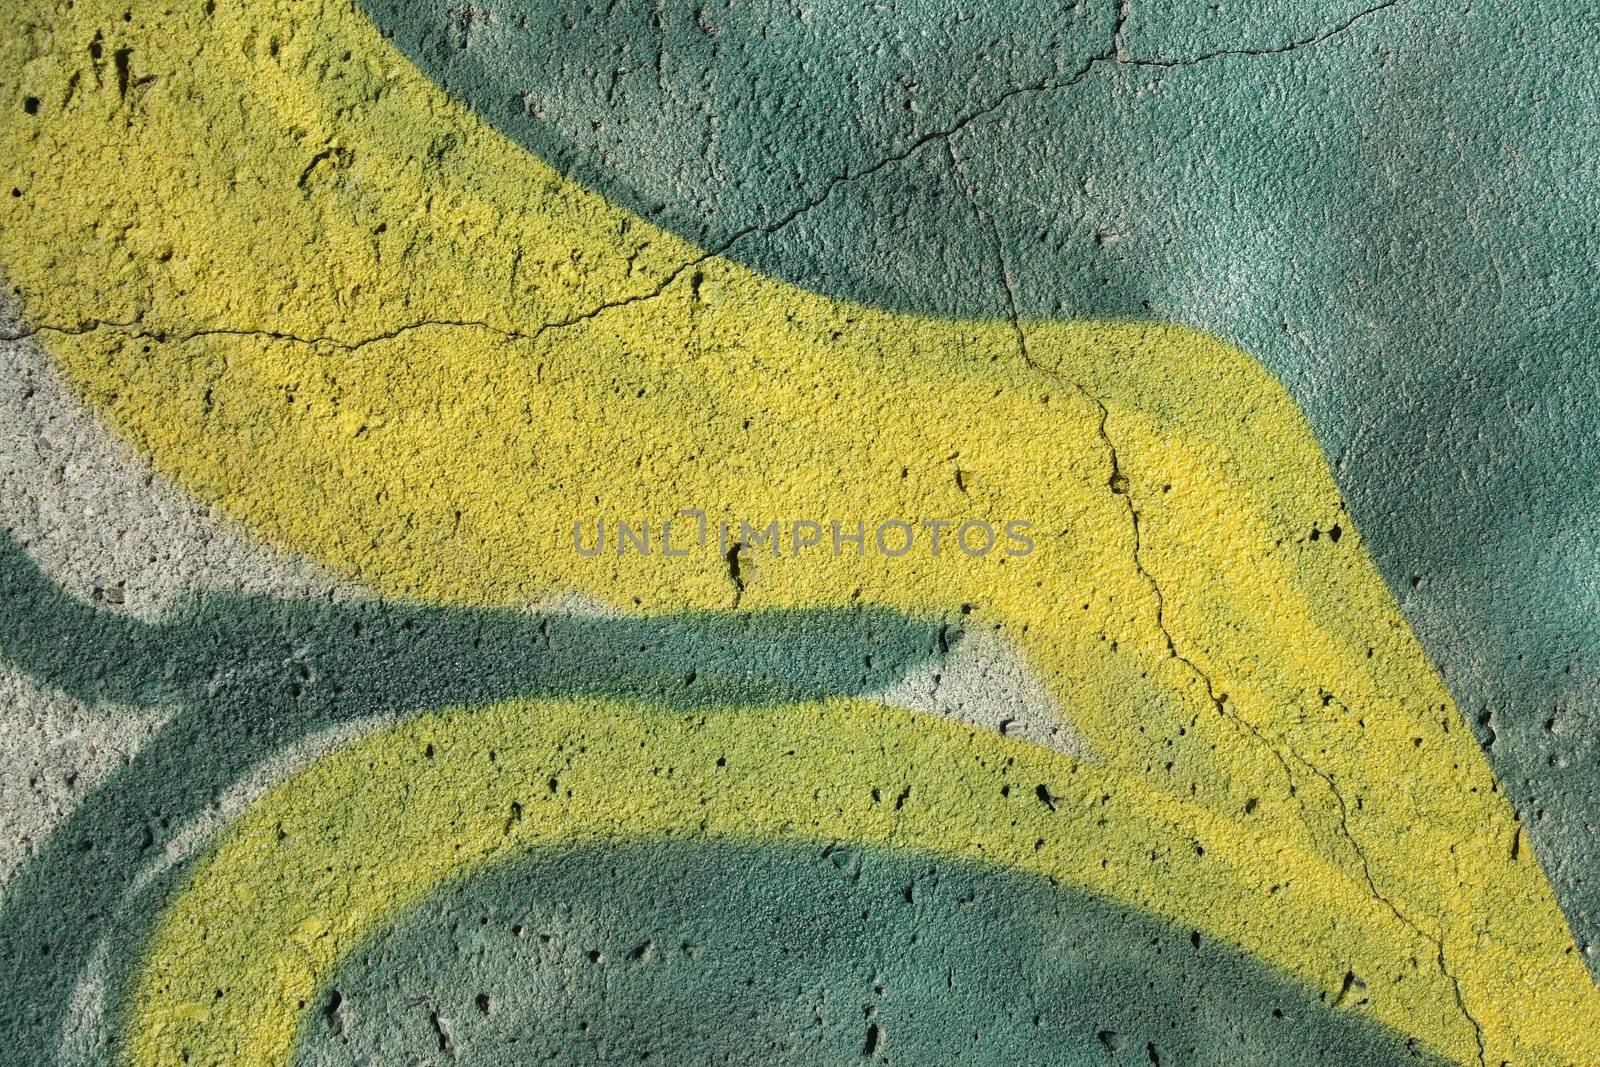 Abstract background: detail of a graffiti on a cracked concrete wall.